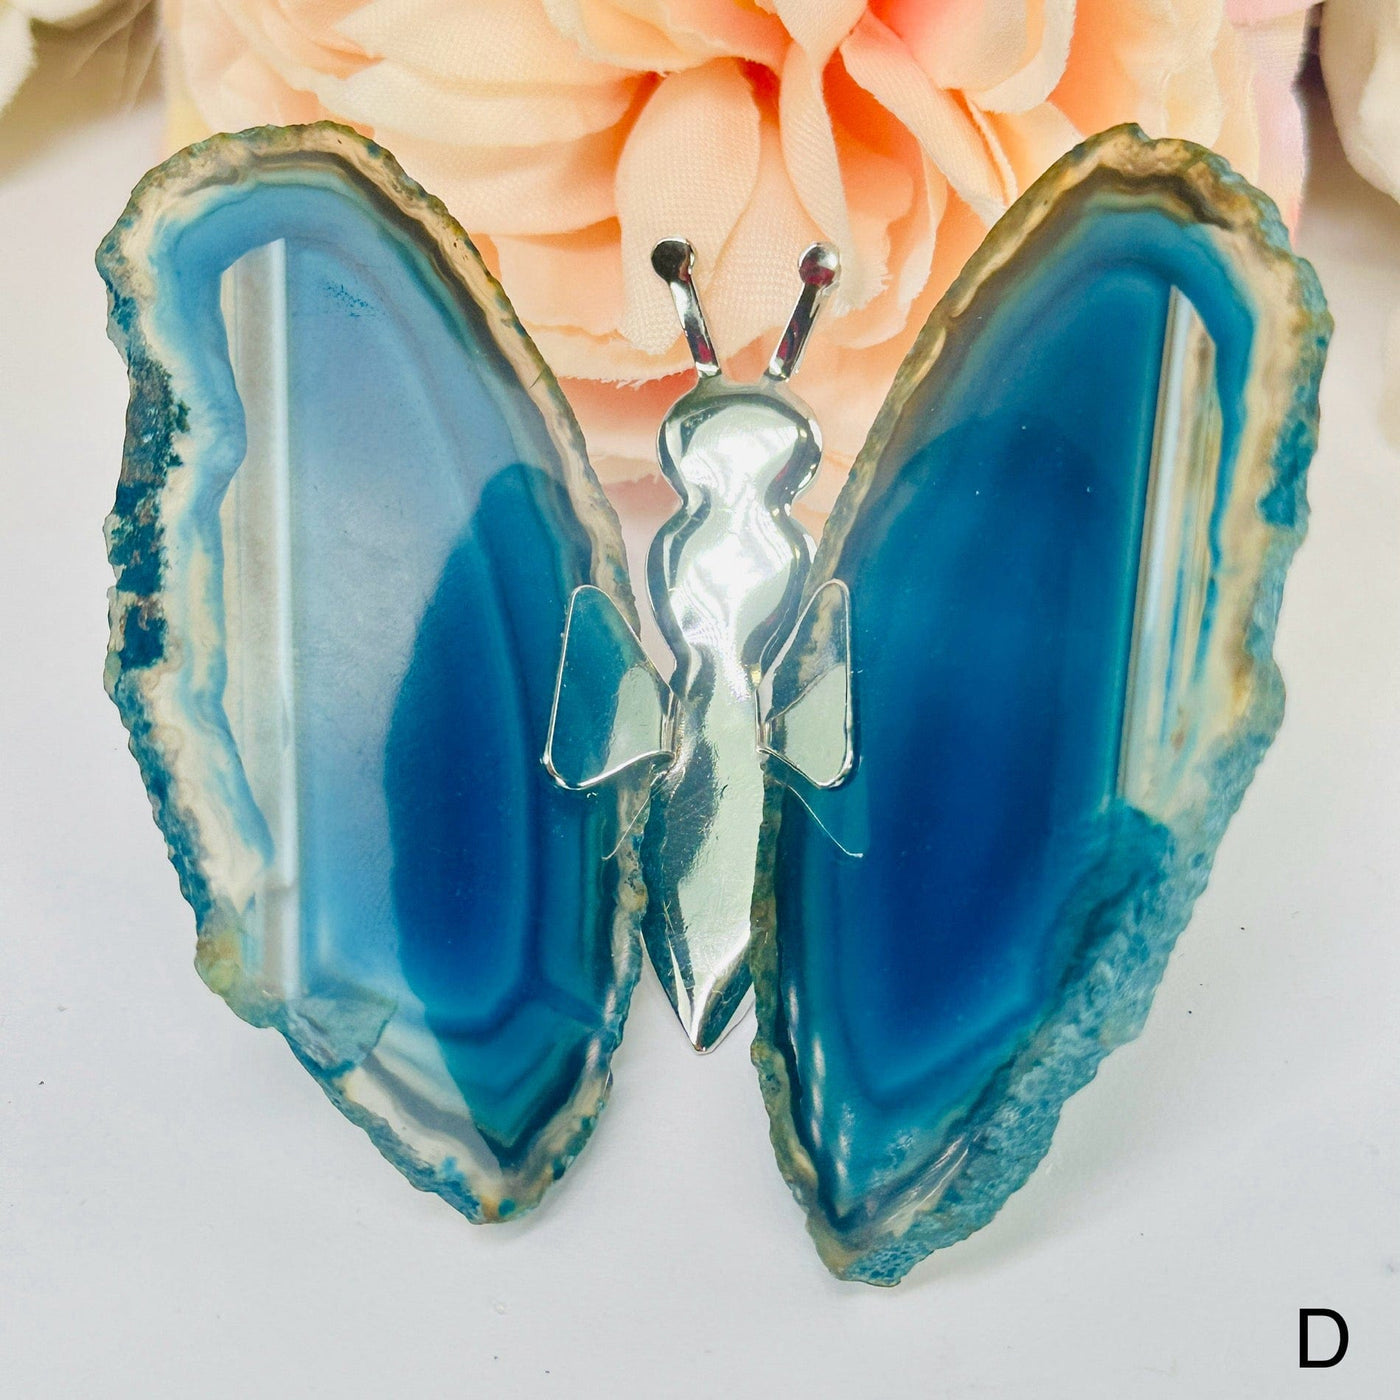 Agate Slice Crystal Butterfly on Stand - Dyed Blue Agate - You Choose variant D labeled